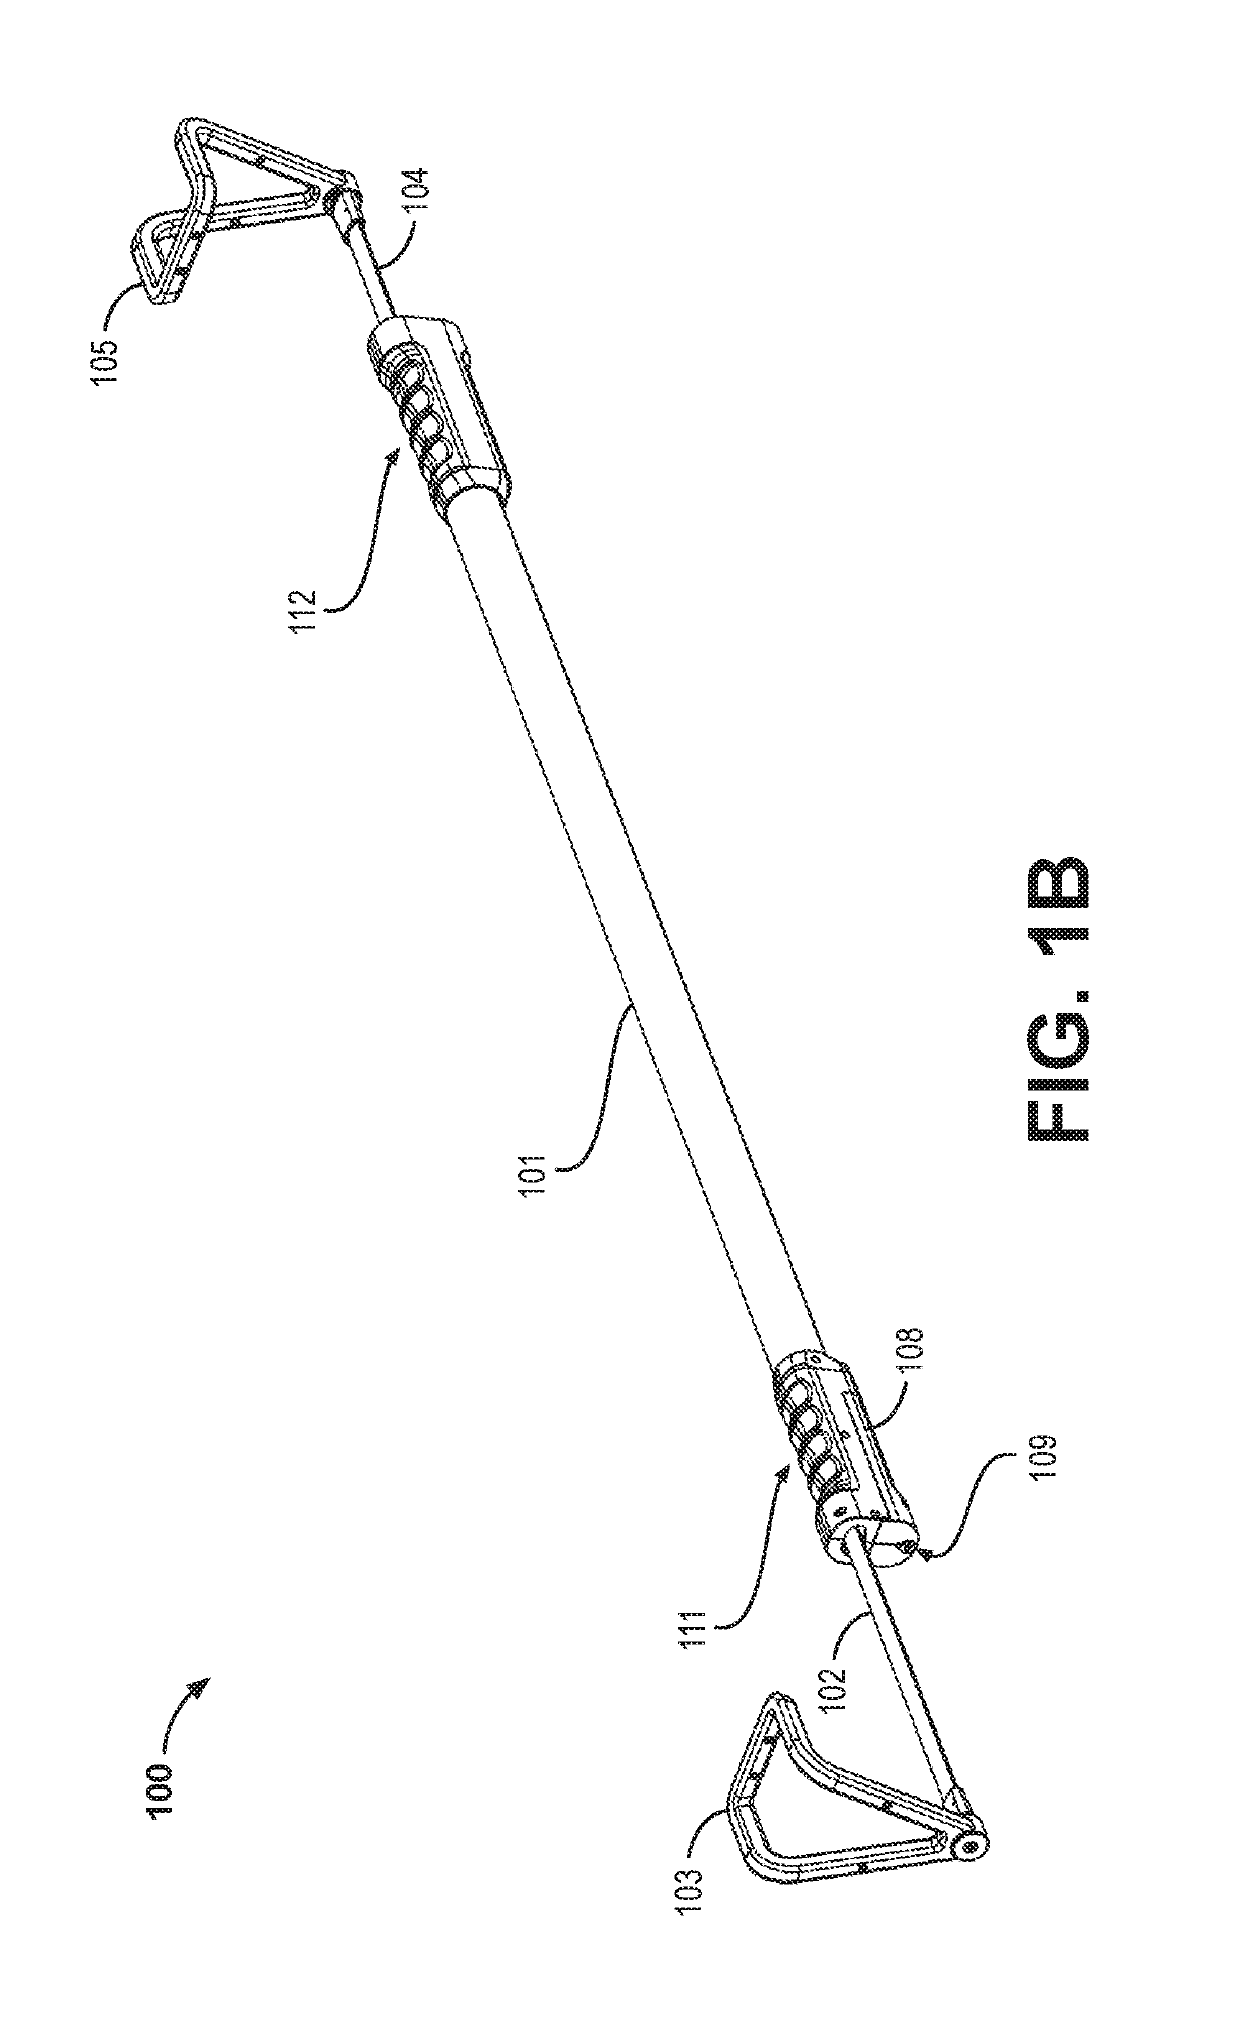 Multi-functional rechargeable lighting apparatus